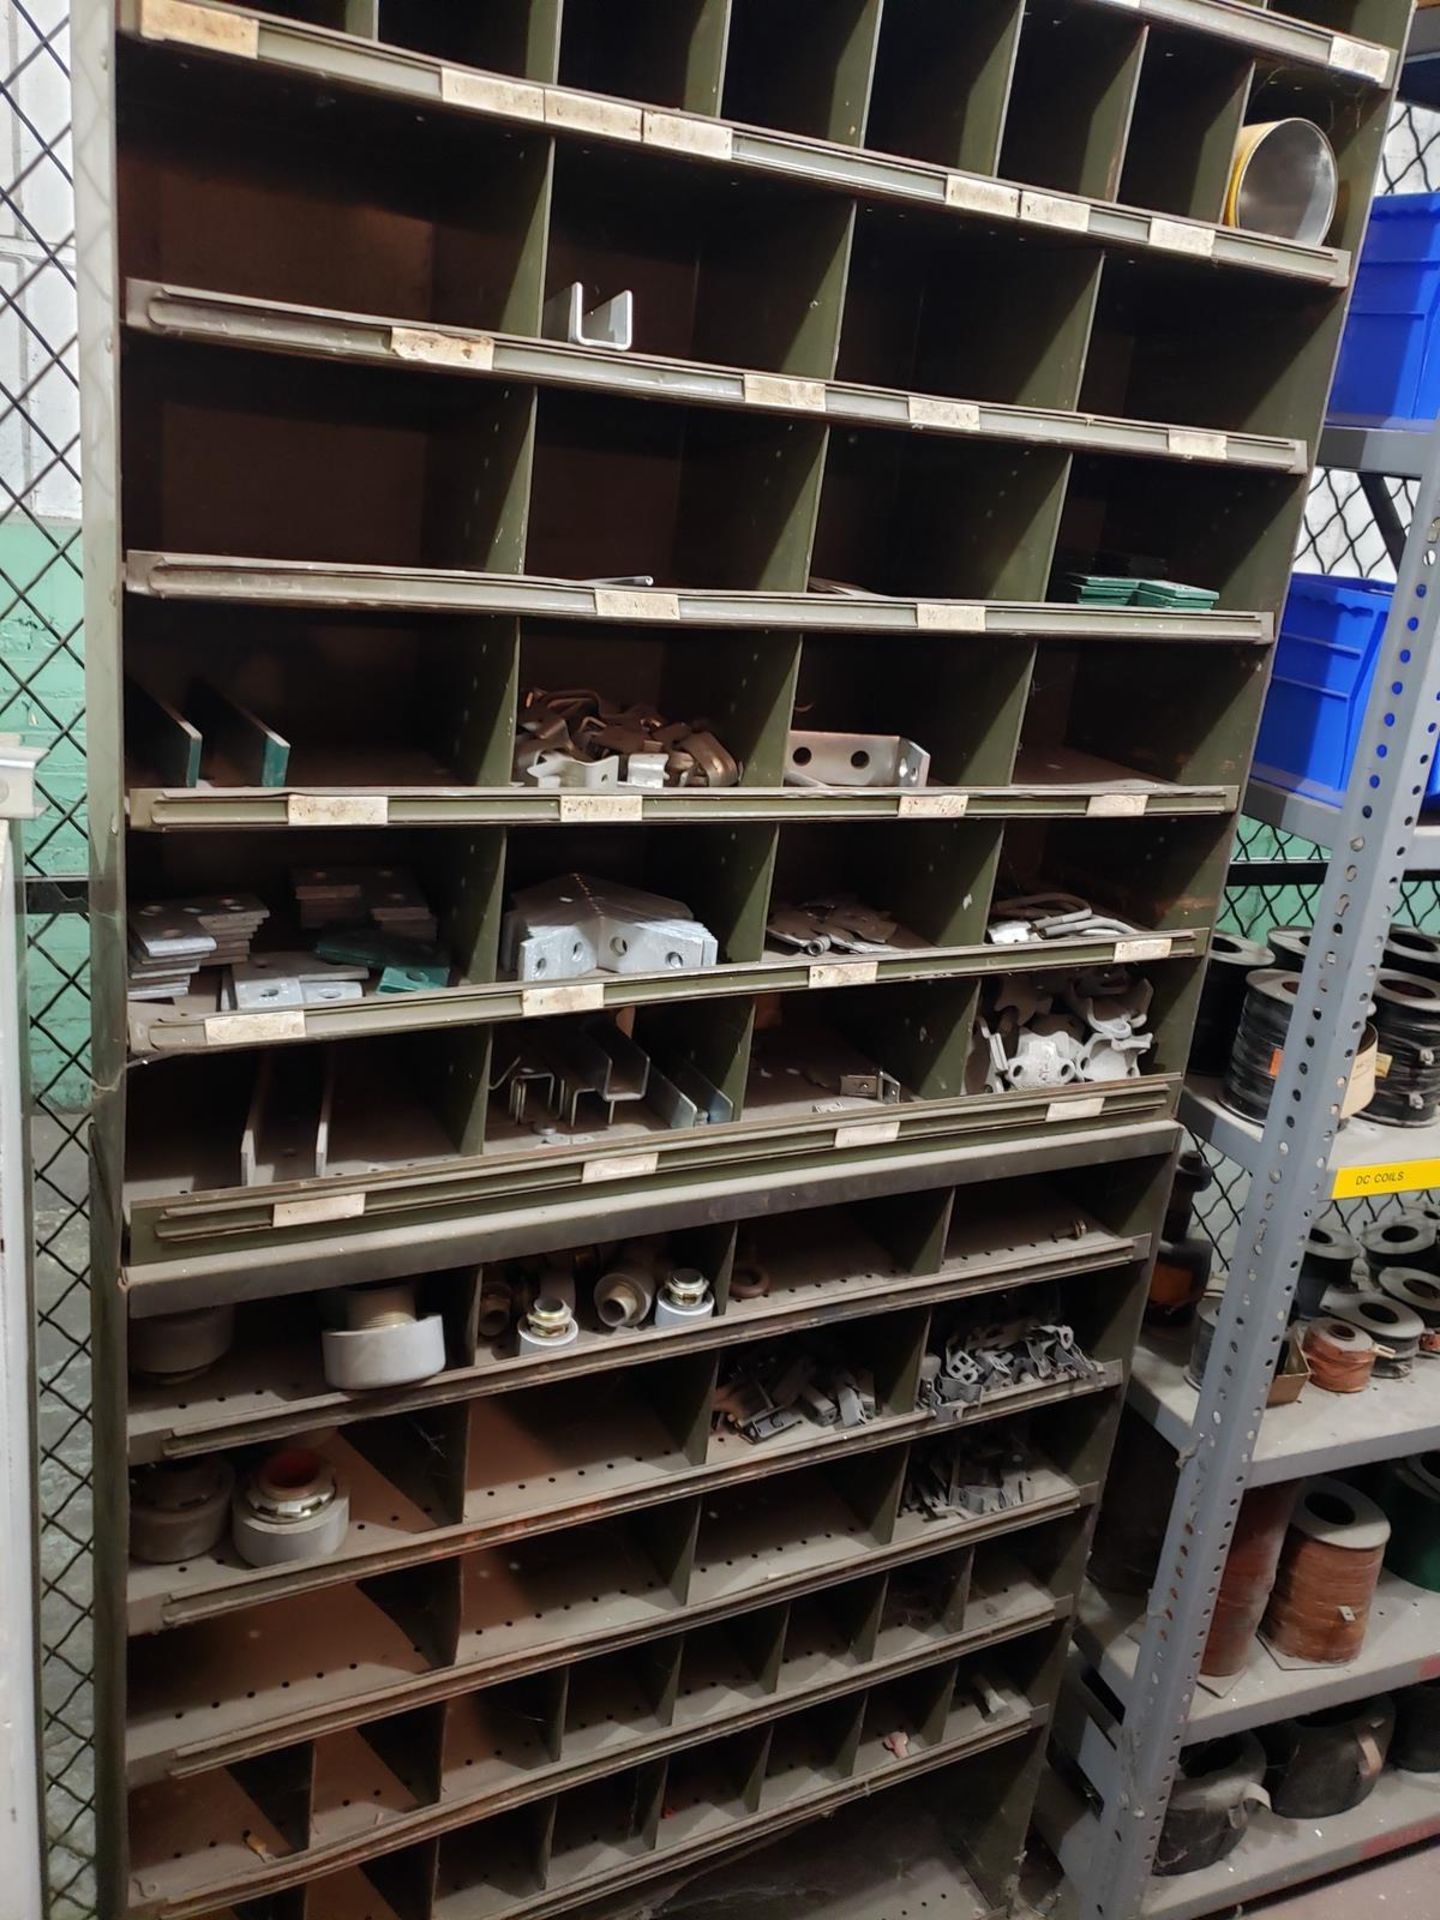 Contents of Spare Parts Storage Cage | Rig Fee $7500 - Image 19 of 20